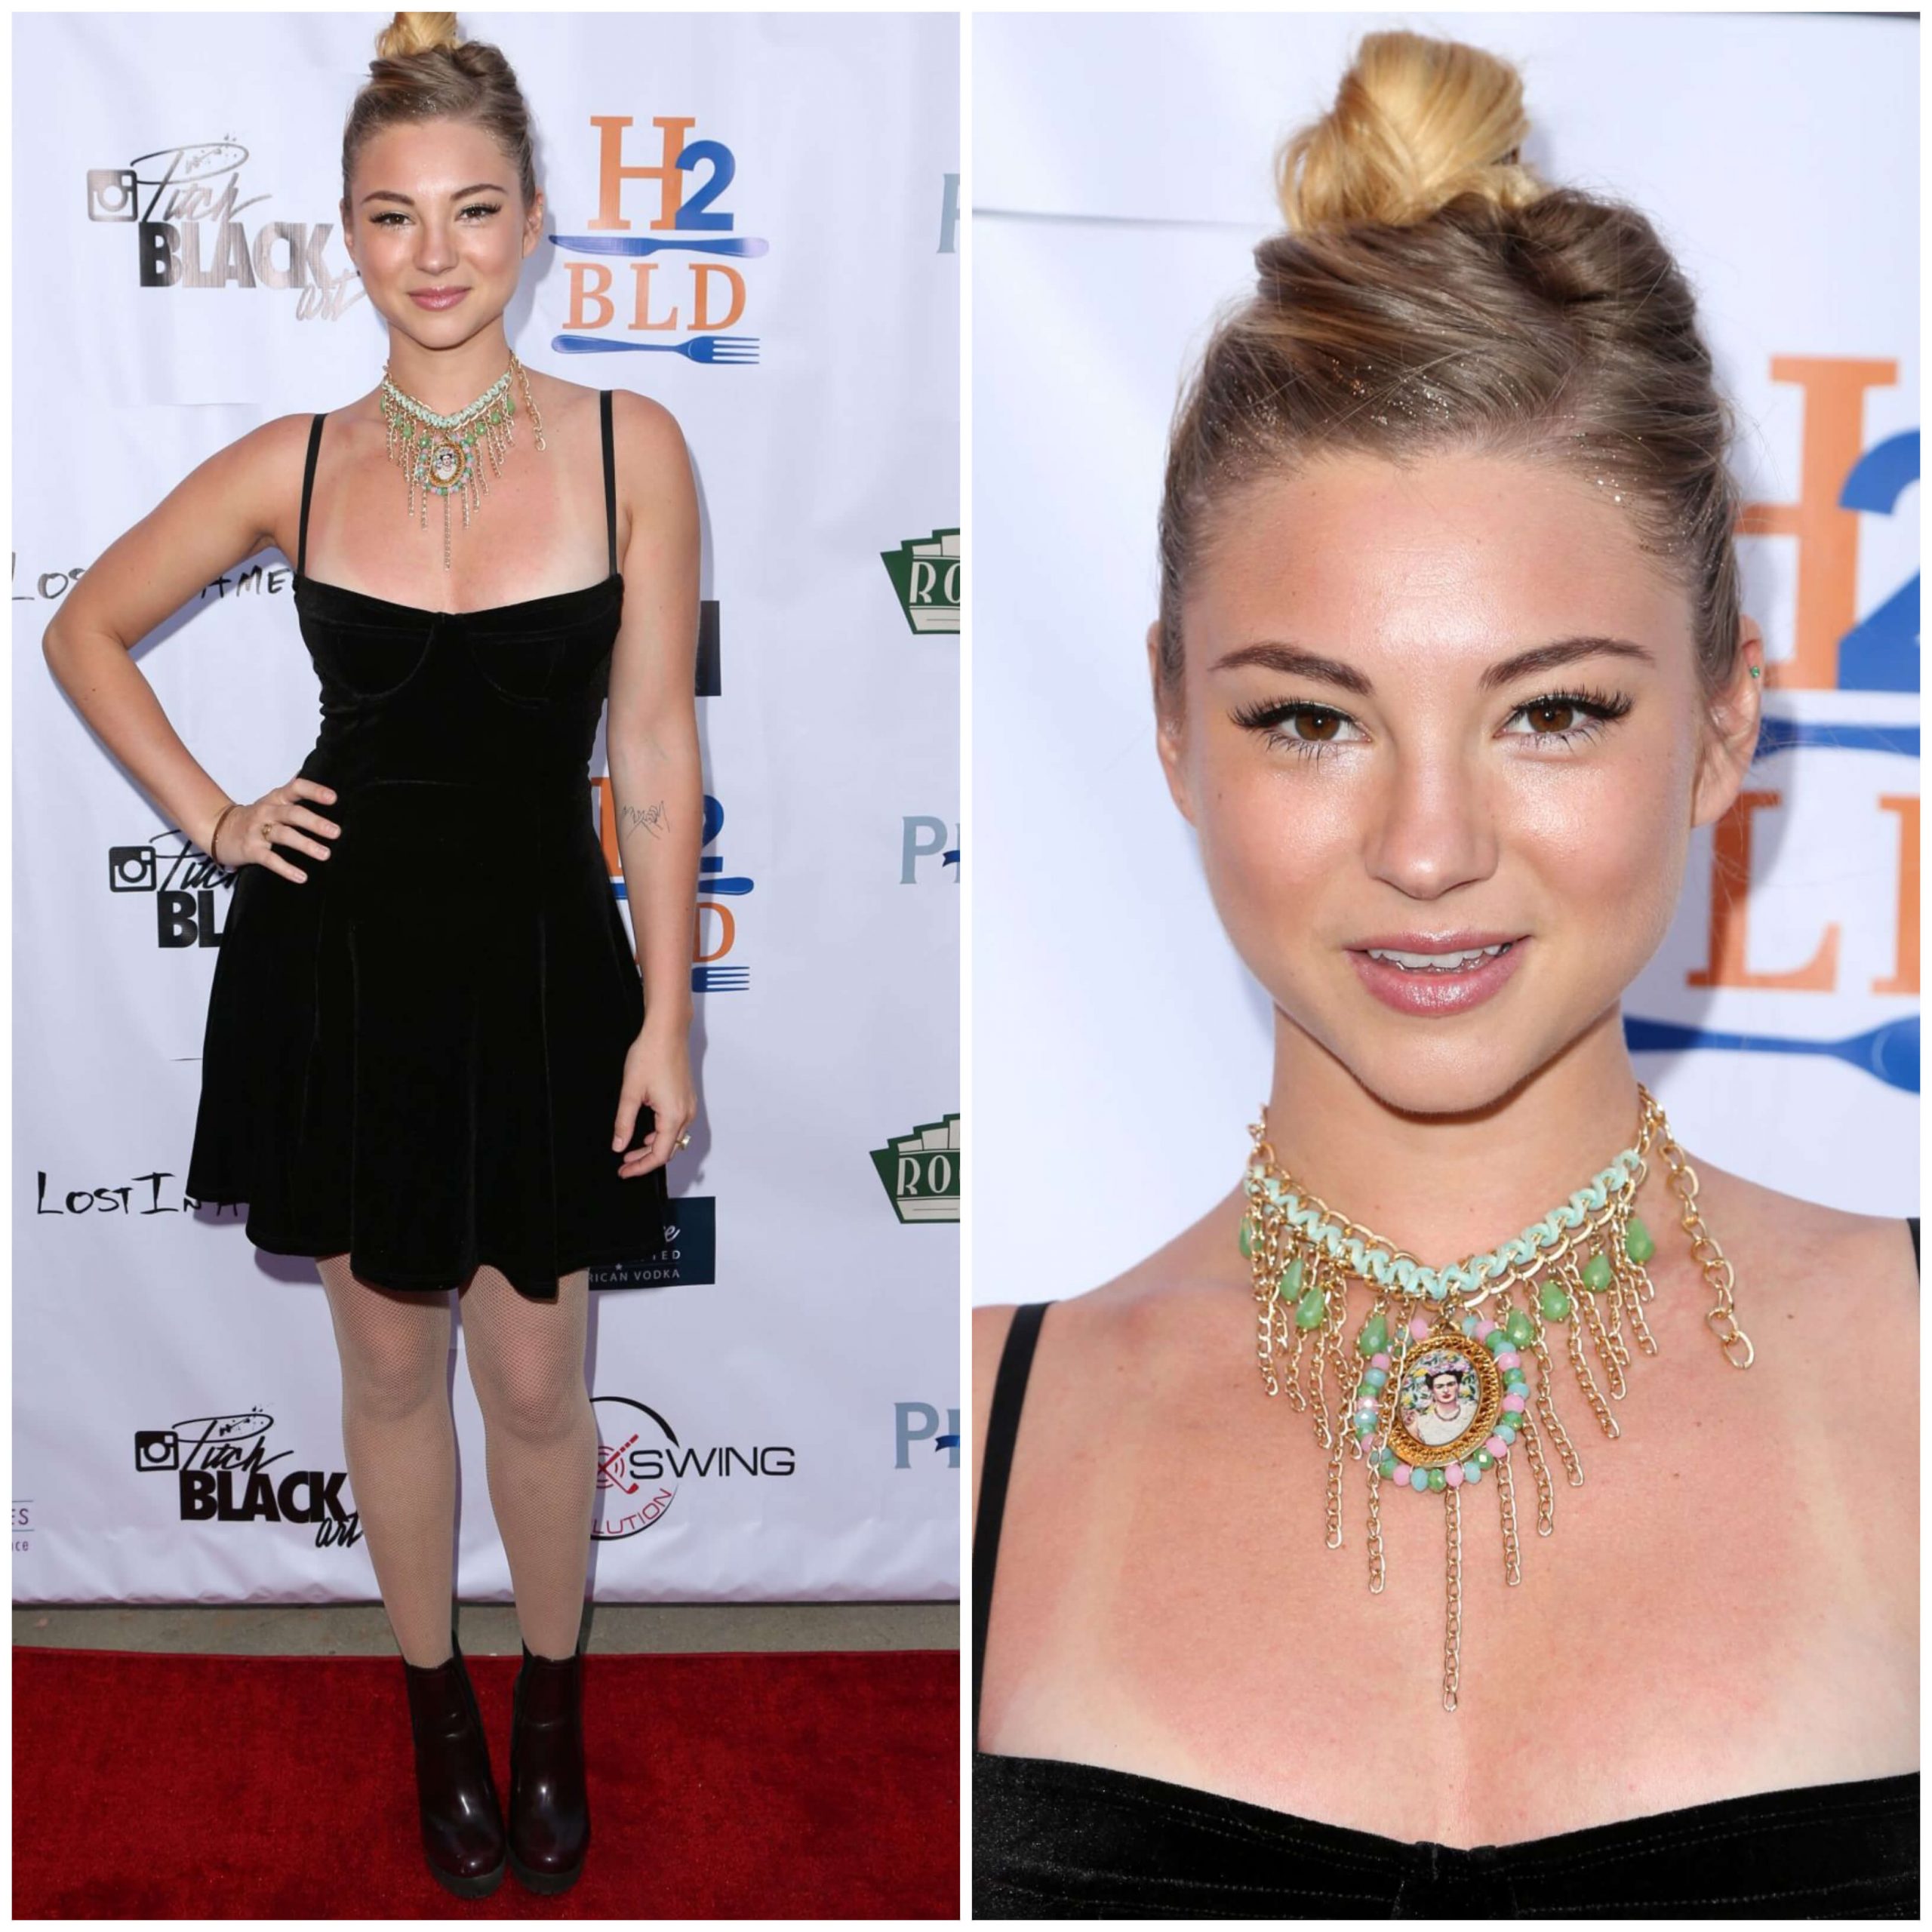 Allie Gonino – Sexy In Black Velvet Deep Neckline Short Dress With Green Ornaments -  ‘Lost in America’ Special Private Screening Premiere